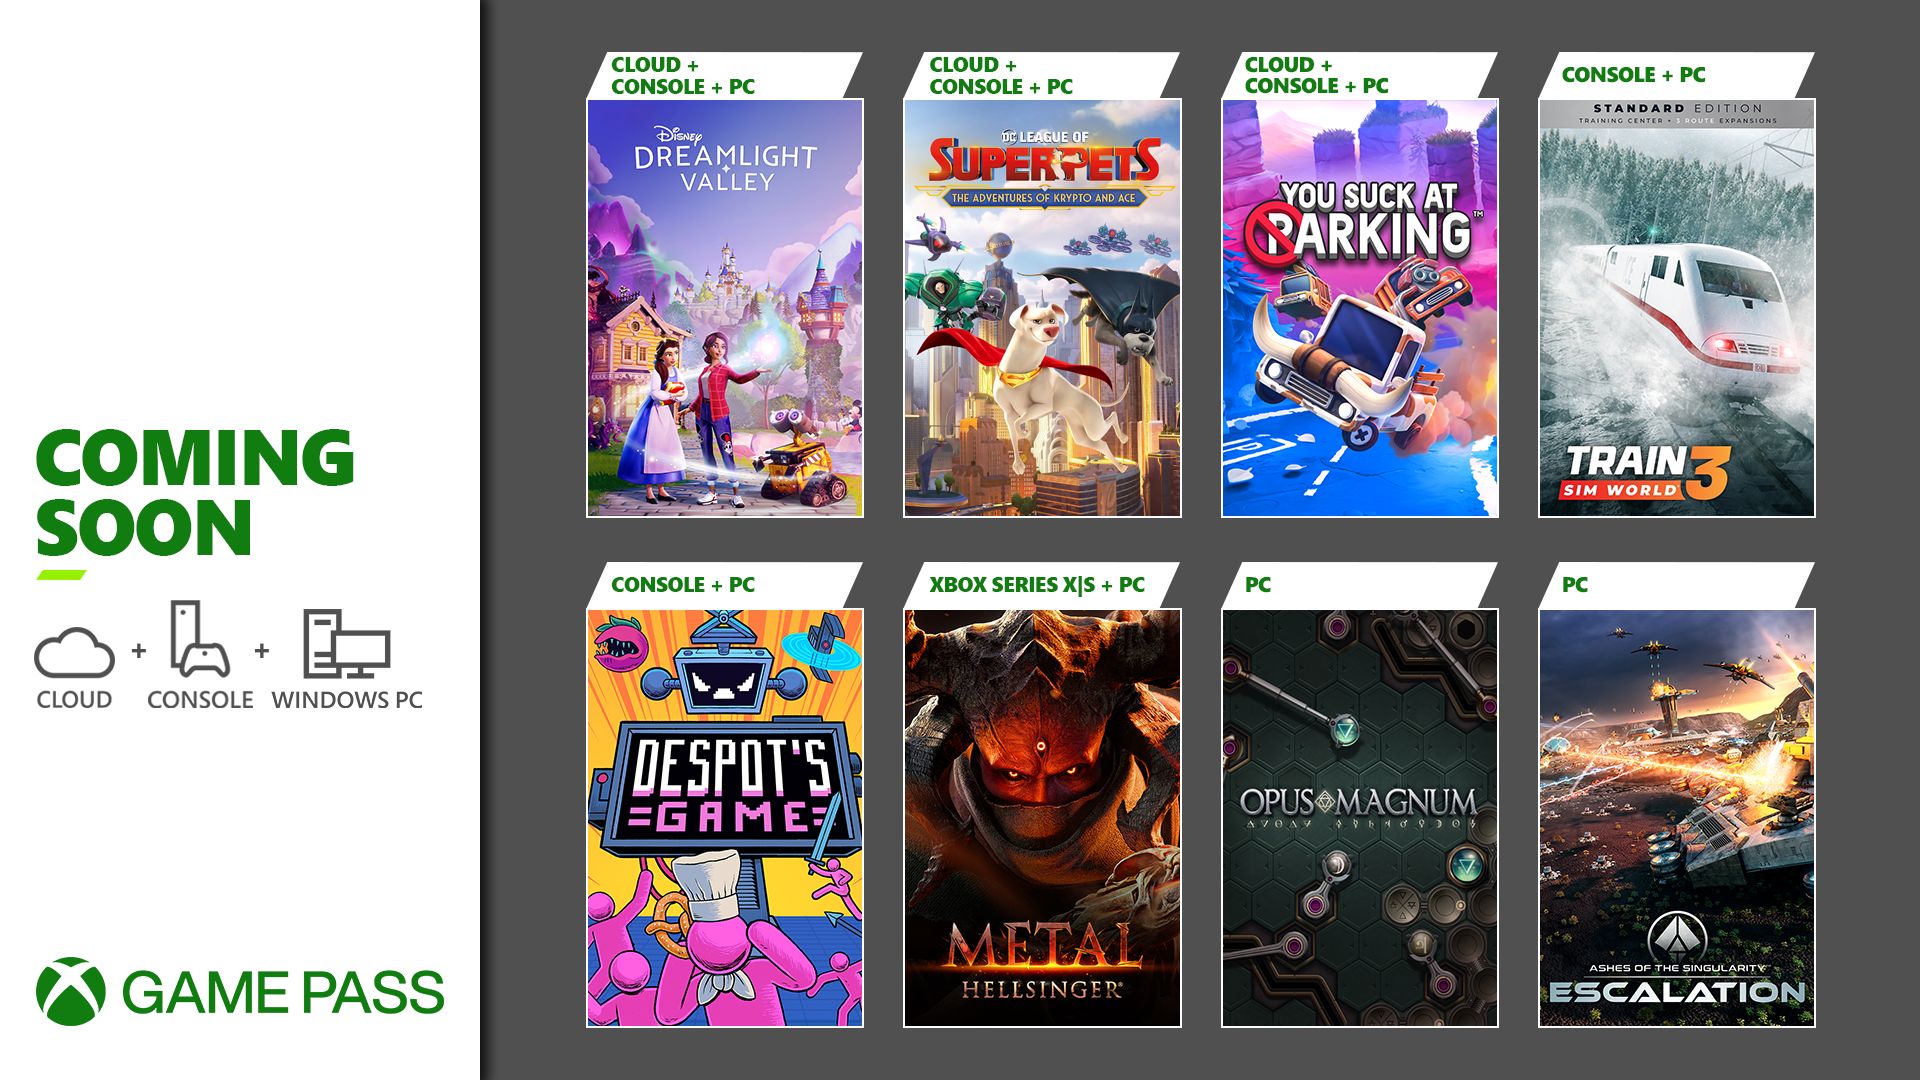 Disney Dreamlight Valley, DC League of Superpets, and more coming soon to Xbox Game Pass